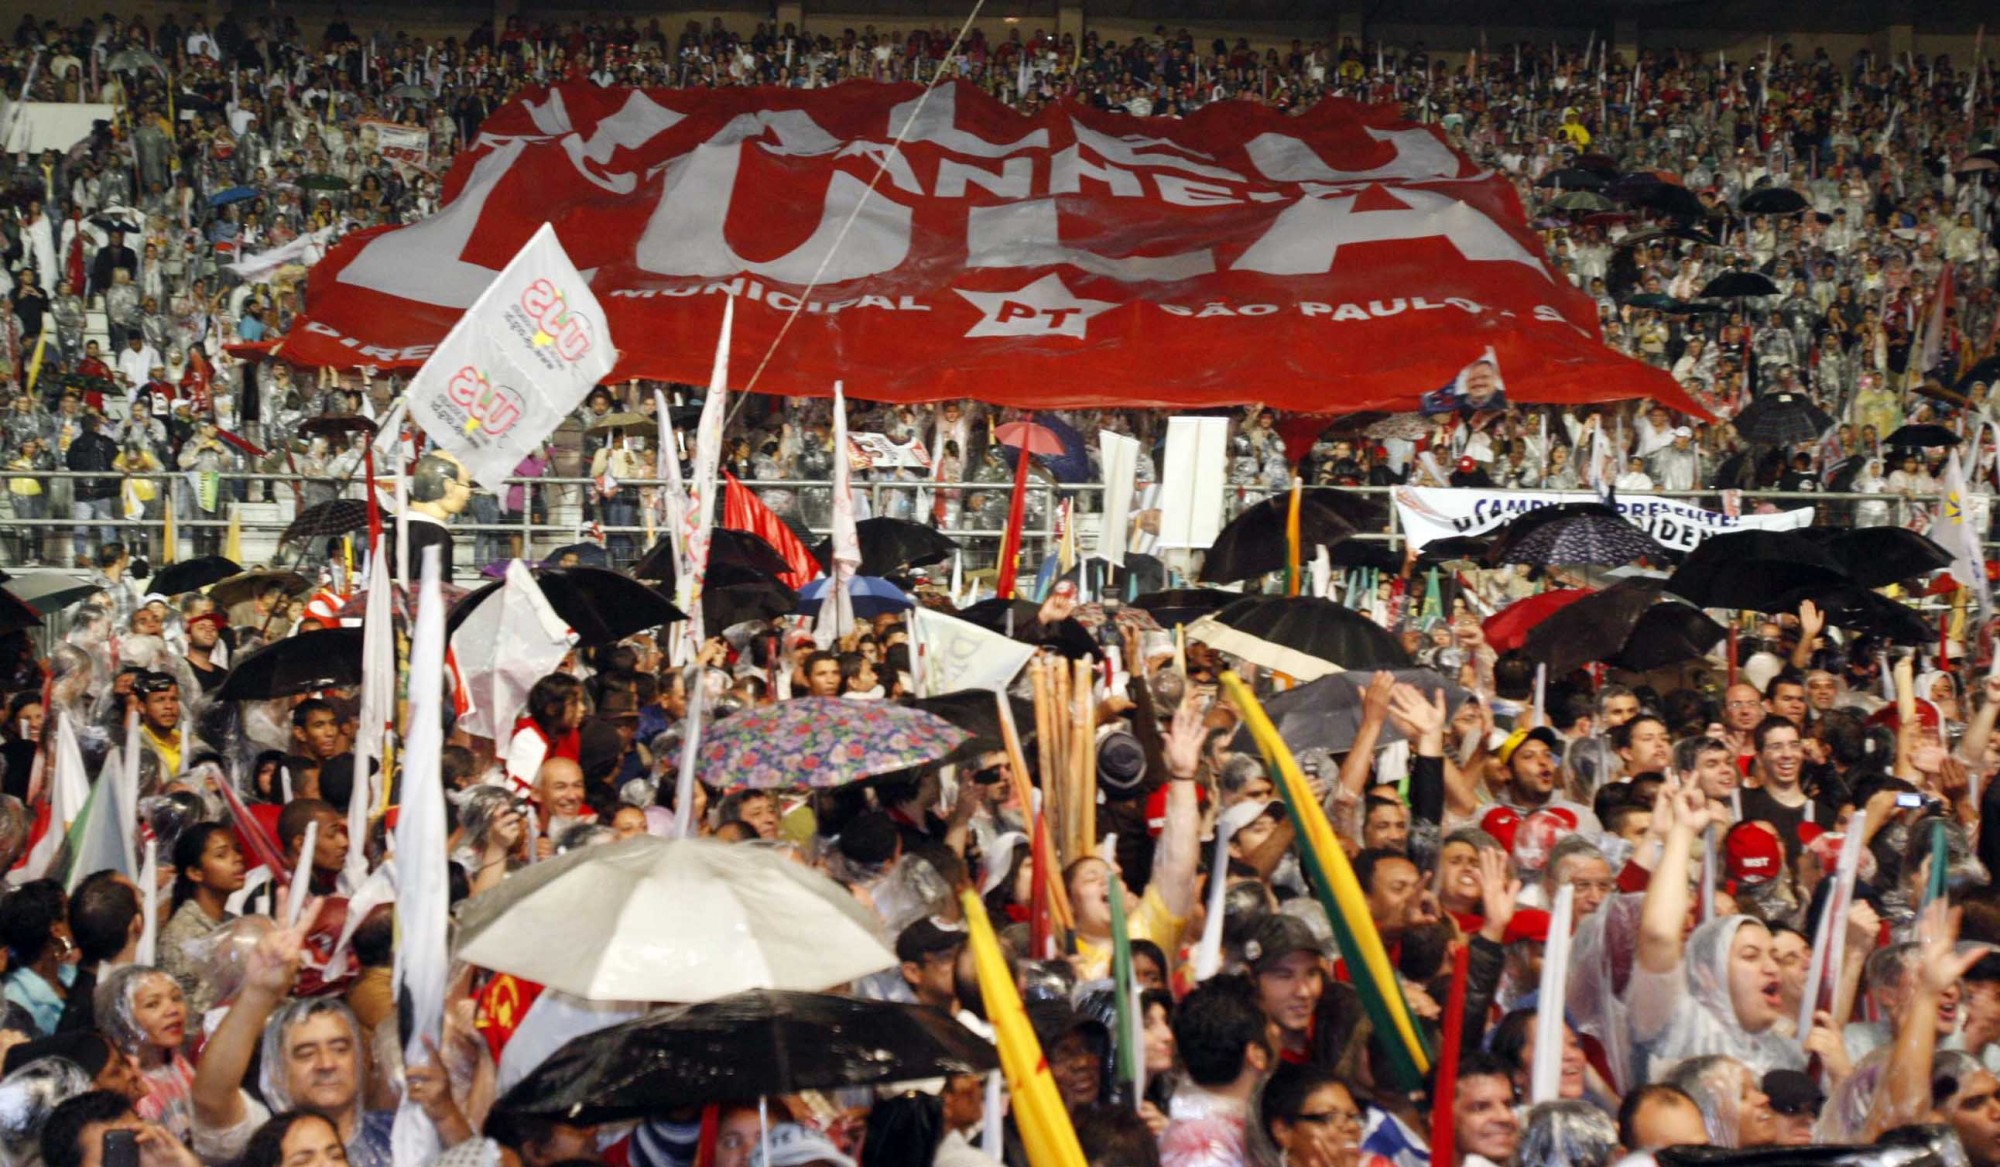 Brazil’s PT Worker’s Party Campaigns For Support